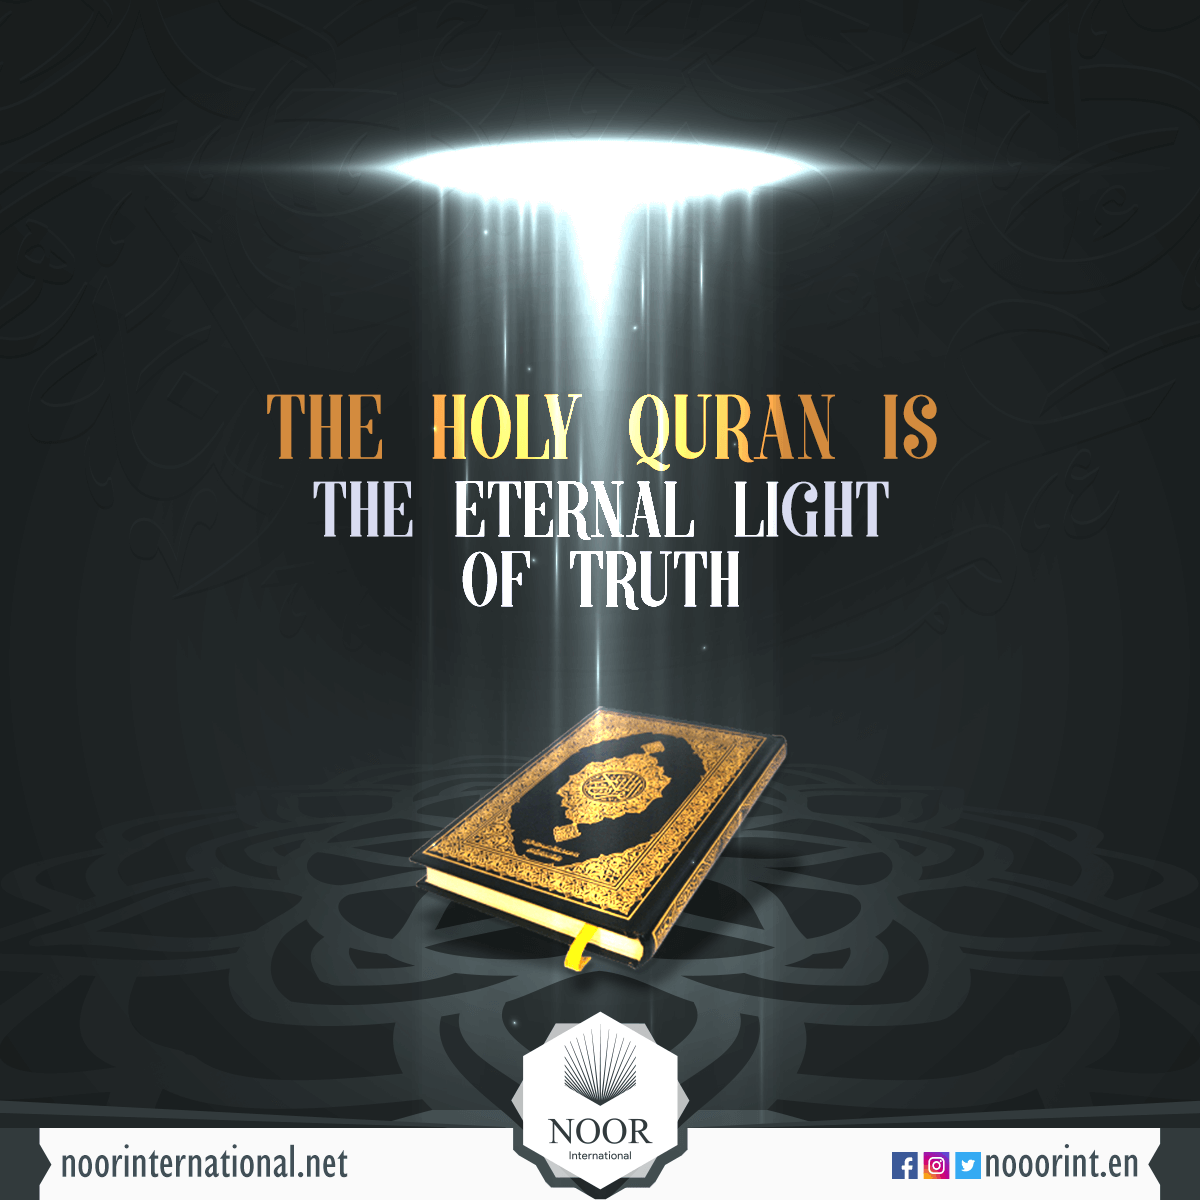 The Holy Quran is the eternal light of truth